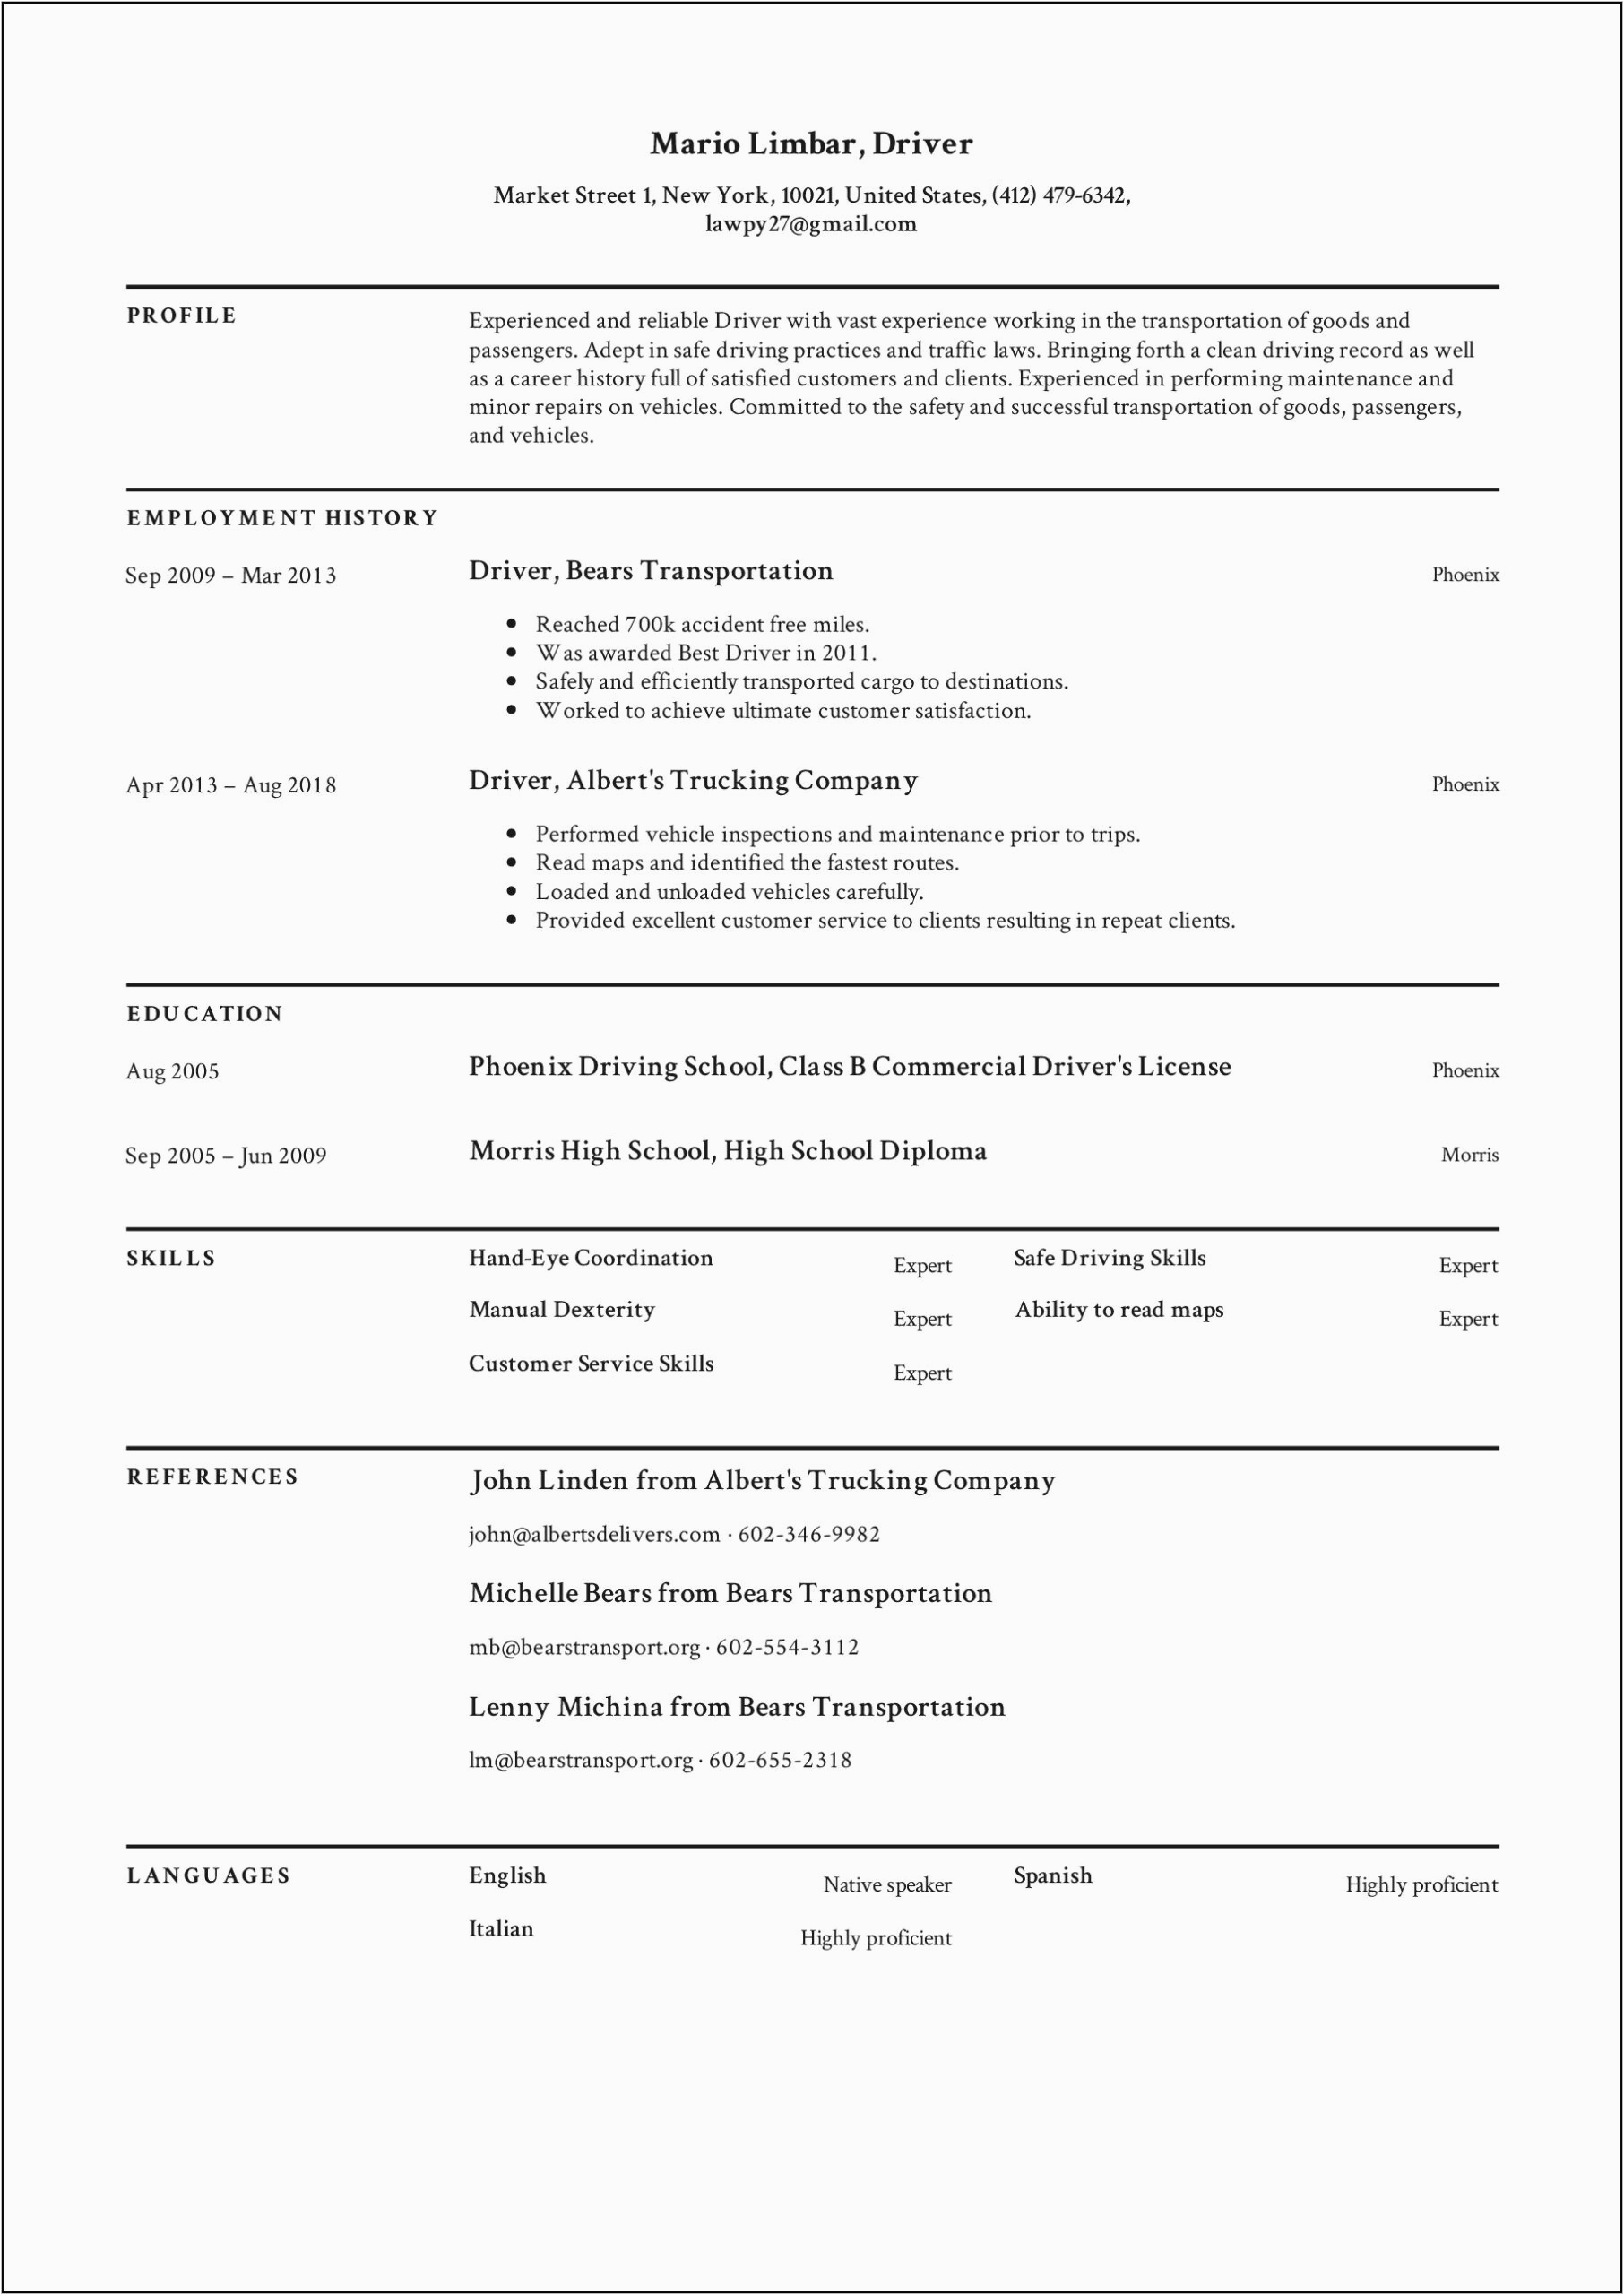 Resume Template for Truck Driving Job Free Truck Driver Resume Template